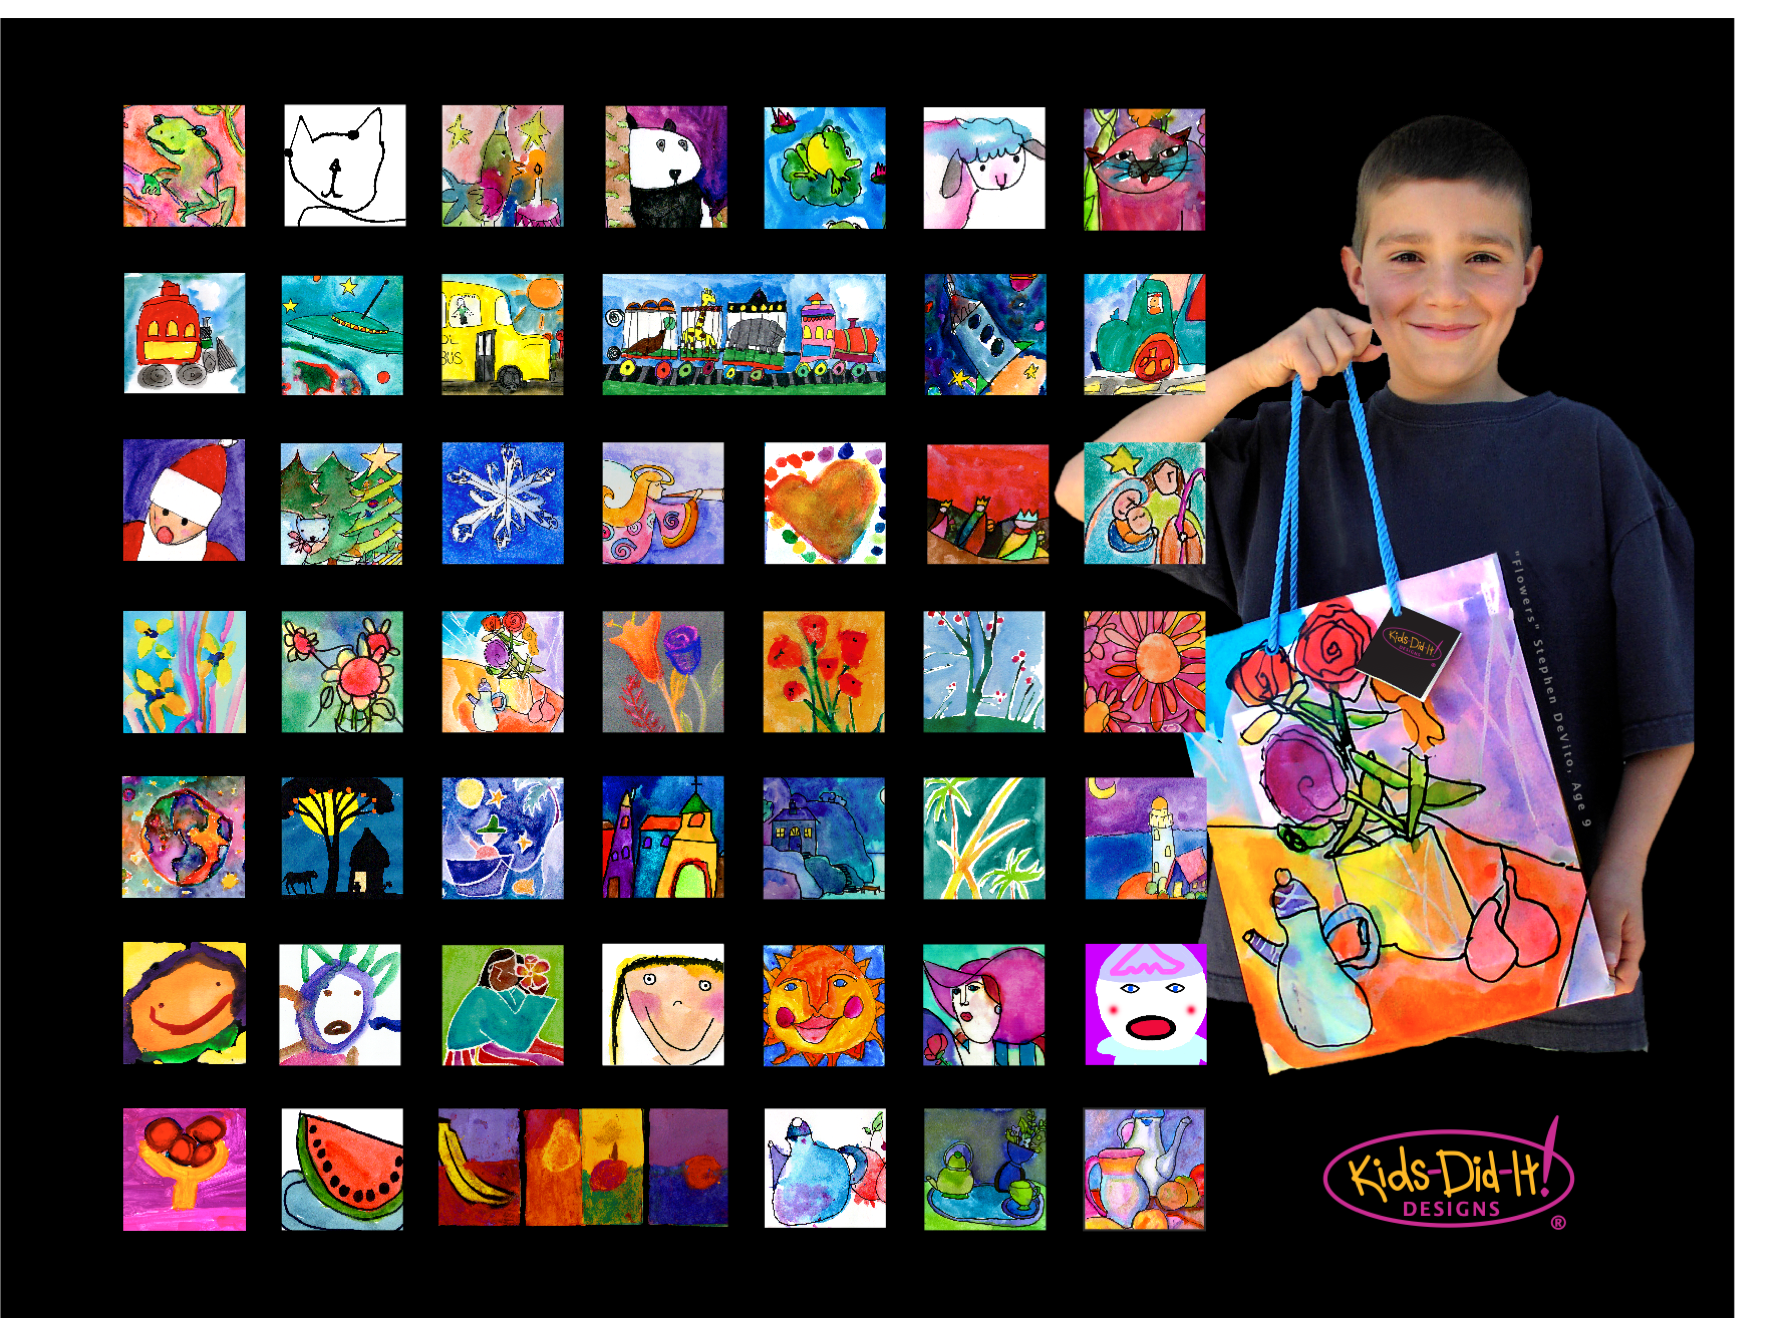 500 Cute and Colorful watercolor Illustrations created by kids showing 7 categories: Animals, Transport, Holiday, Flowers, Landscape, People & Faces, Still Life © Kids-Did-It! Properties registered copyright VA138-4142 U.S. Library of Congress. With Artist Stephen DeVito Age 7 holding his illustrated gift bag, "Flowers".